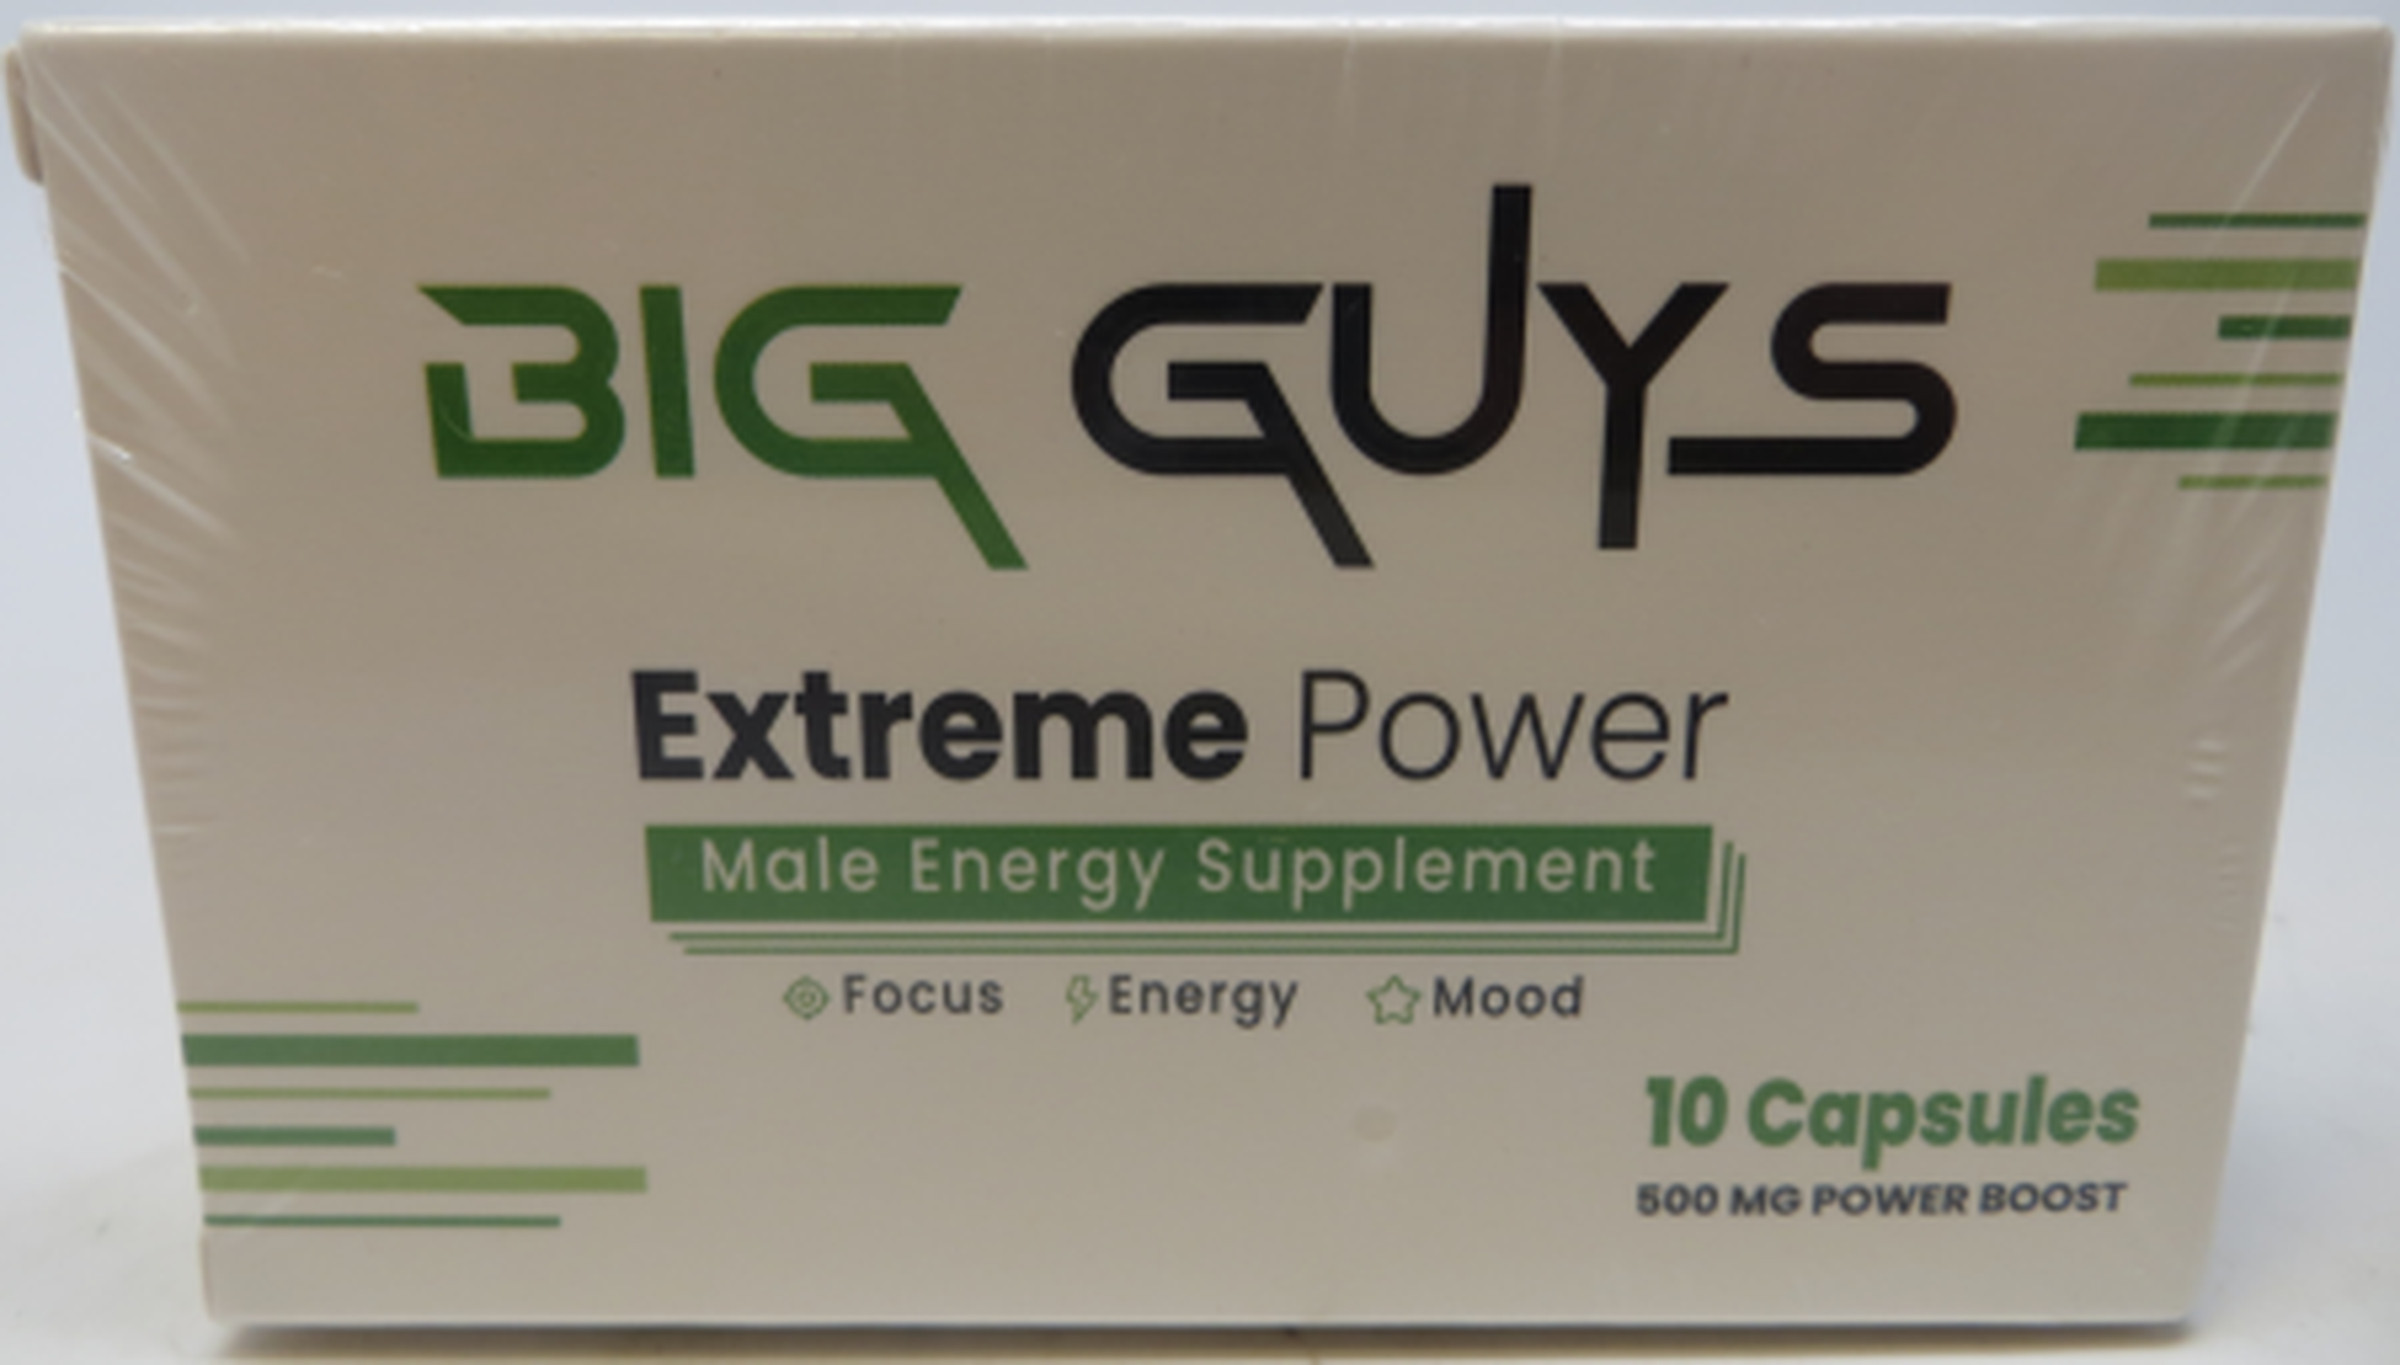 A box that says it contains 10 capsules of Big Guys Extreme Power Male Energy Supplement.